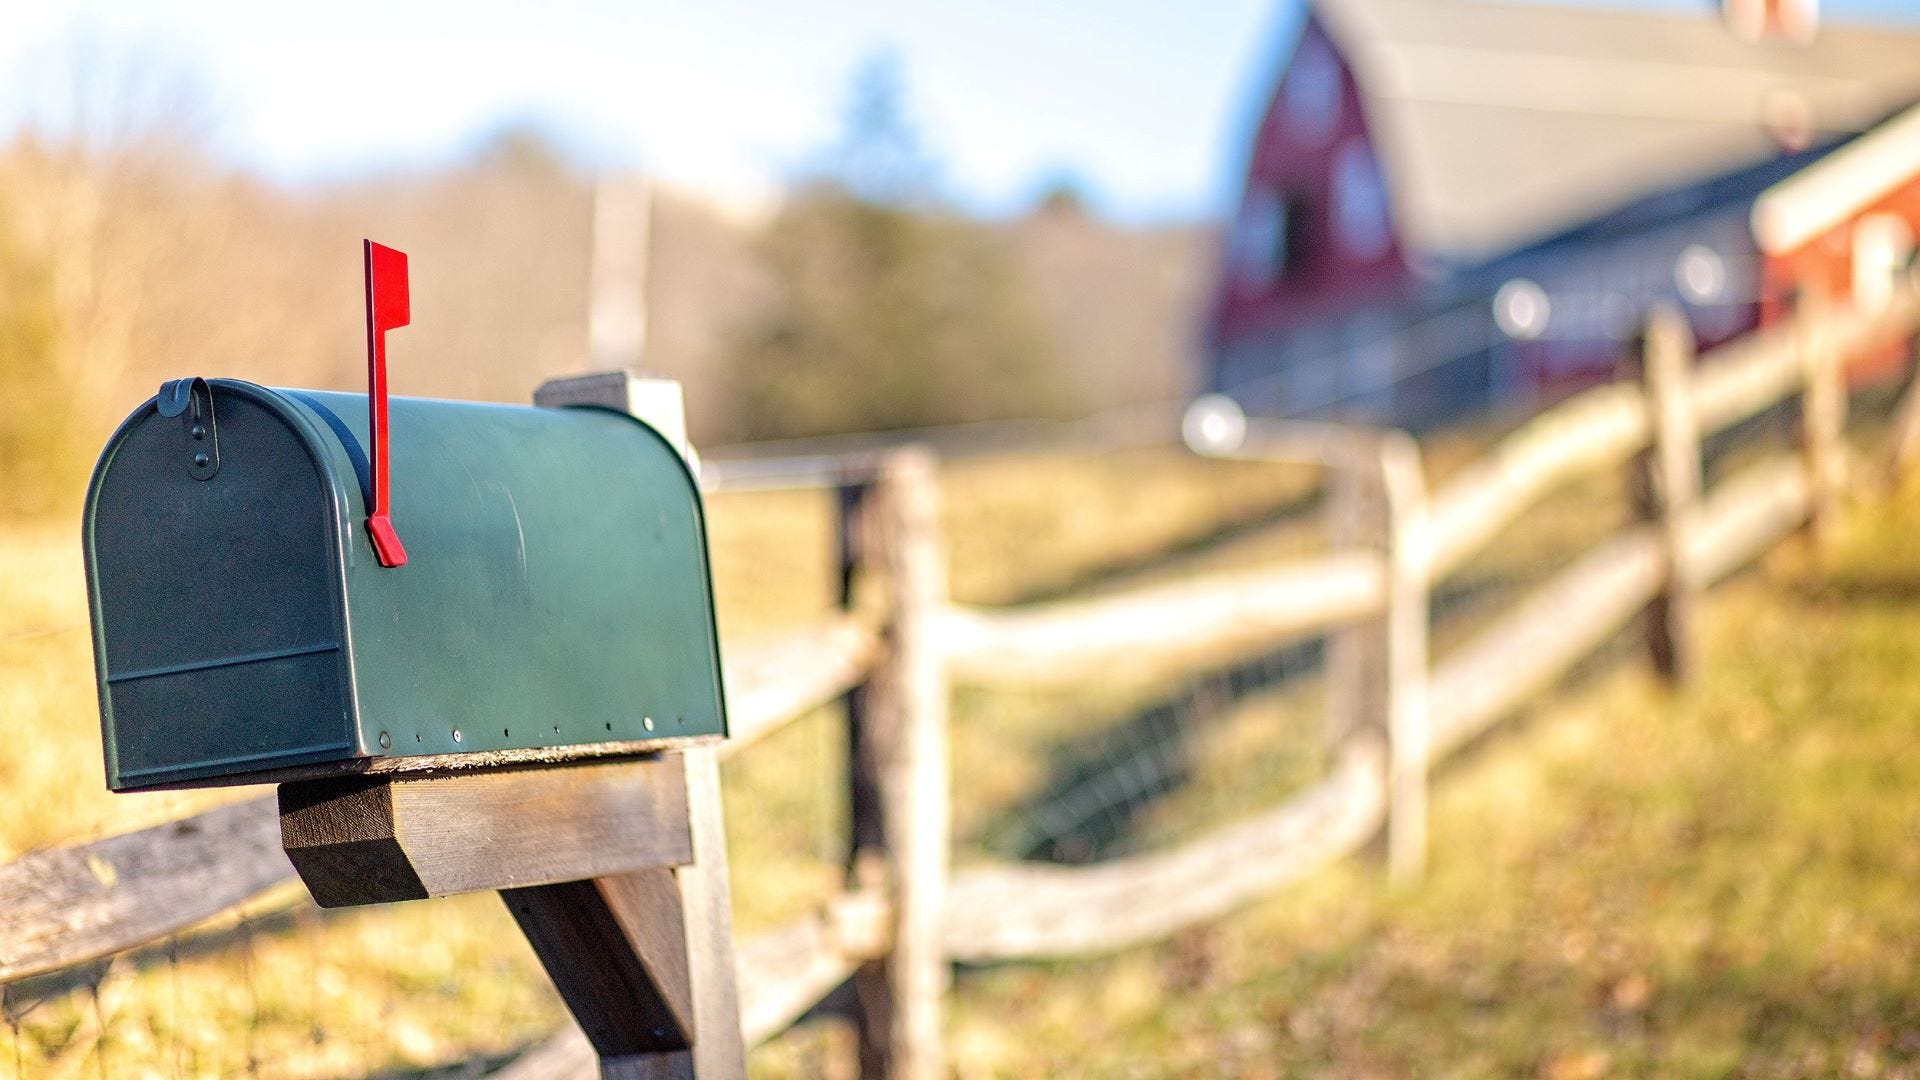 Here’s Why You Might Find a Dryer Sheet in Your Mailbox